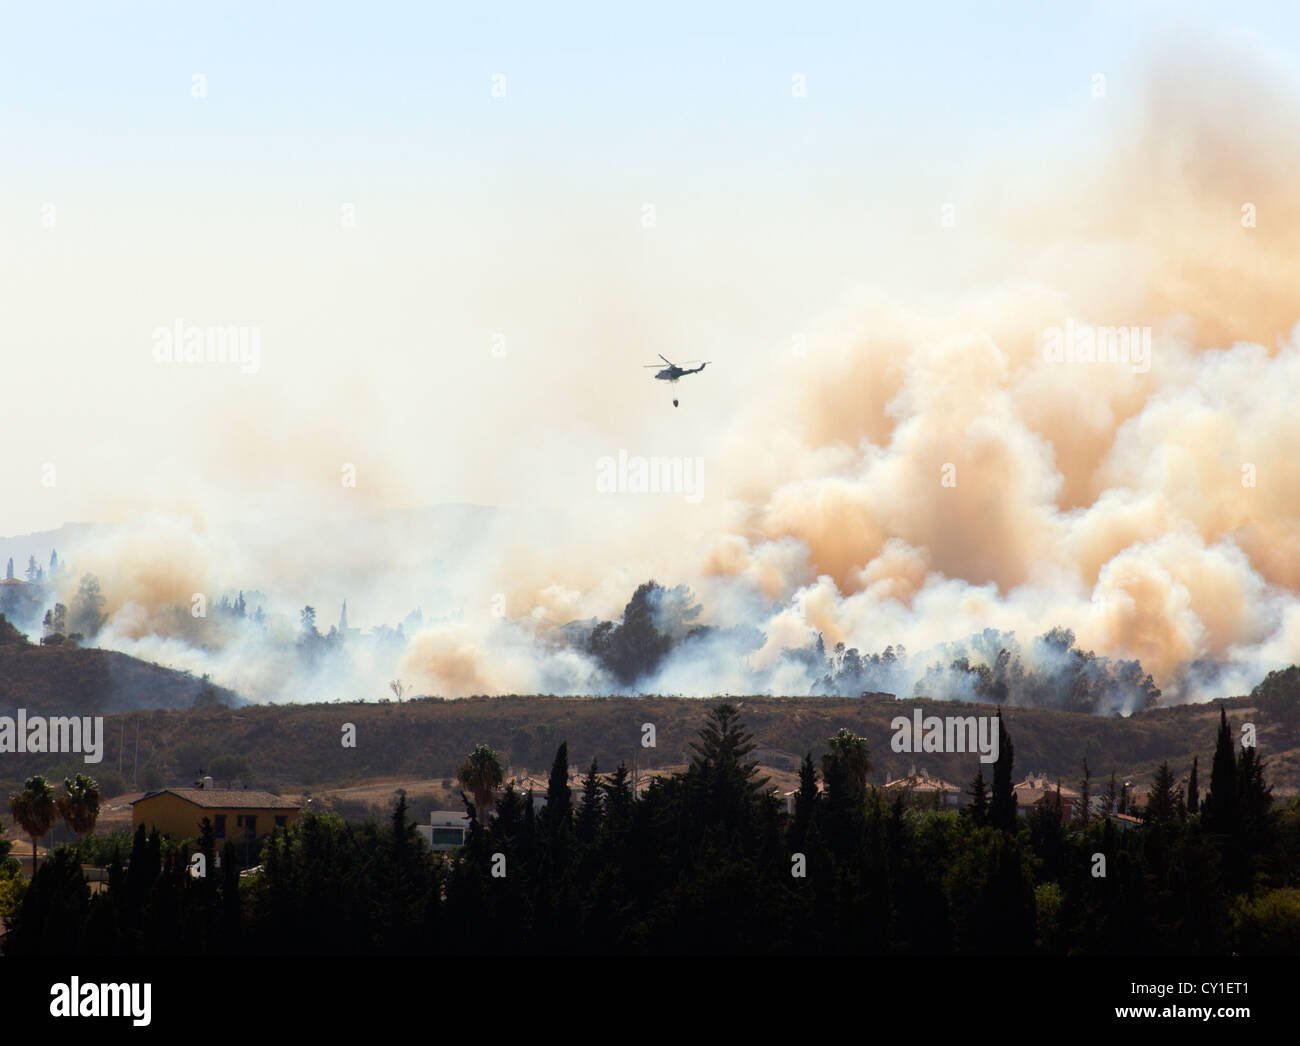 Rescue helicopter helping to extinguish wildfire. Mijas Costa, Malaga, Costa del Sol, Andalucia, Spain. Stock Photo